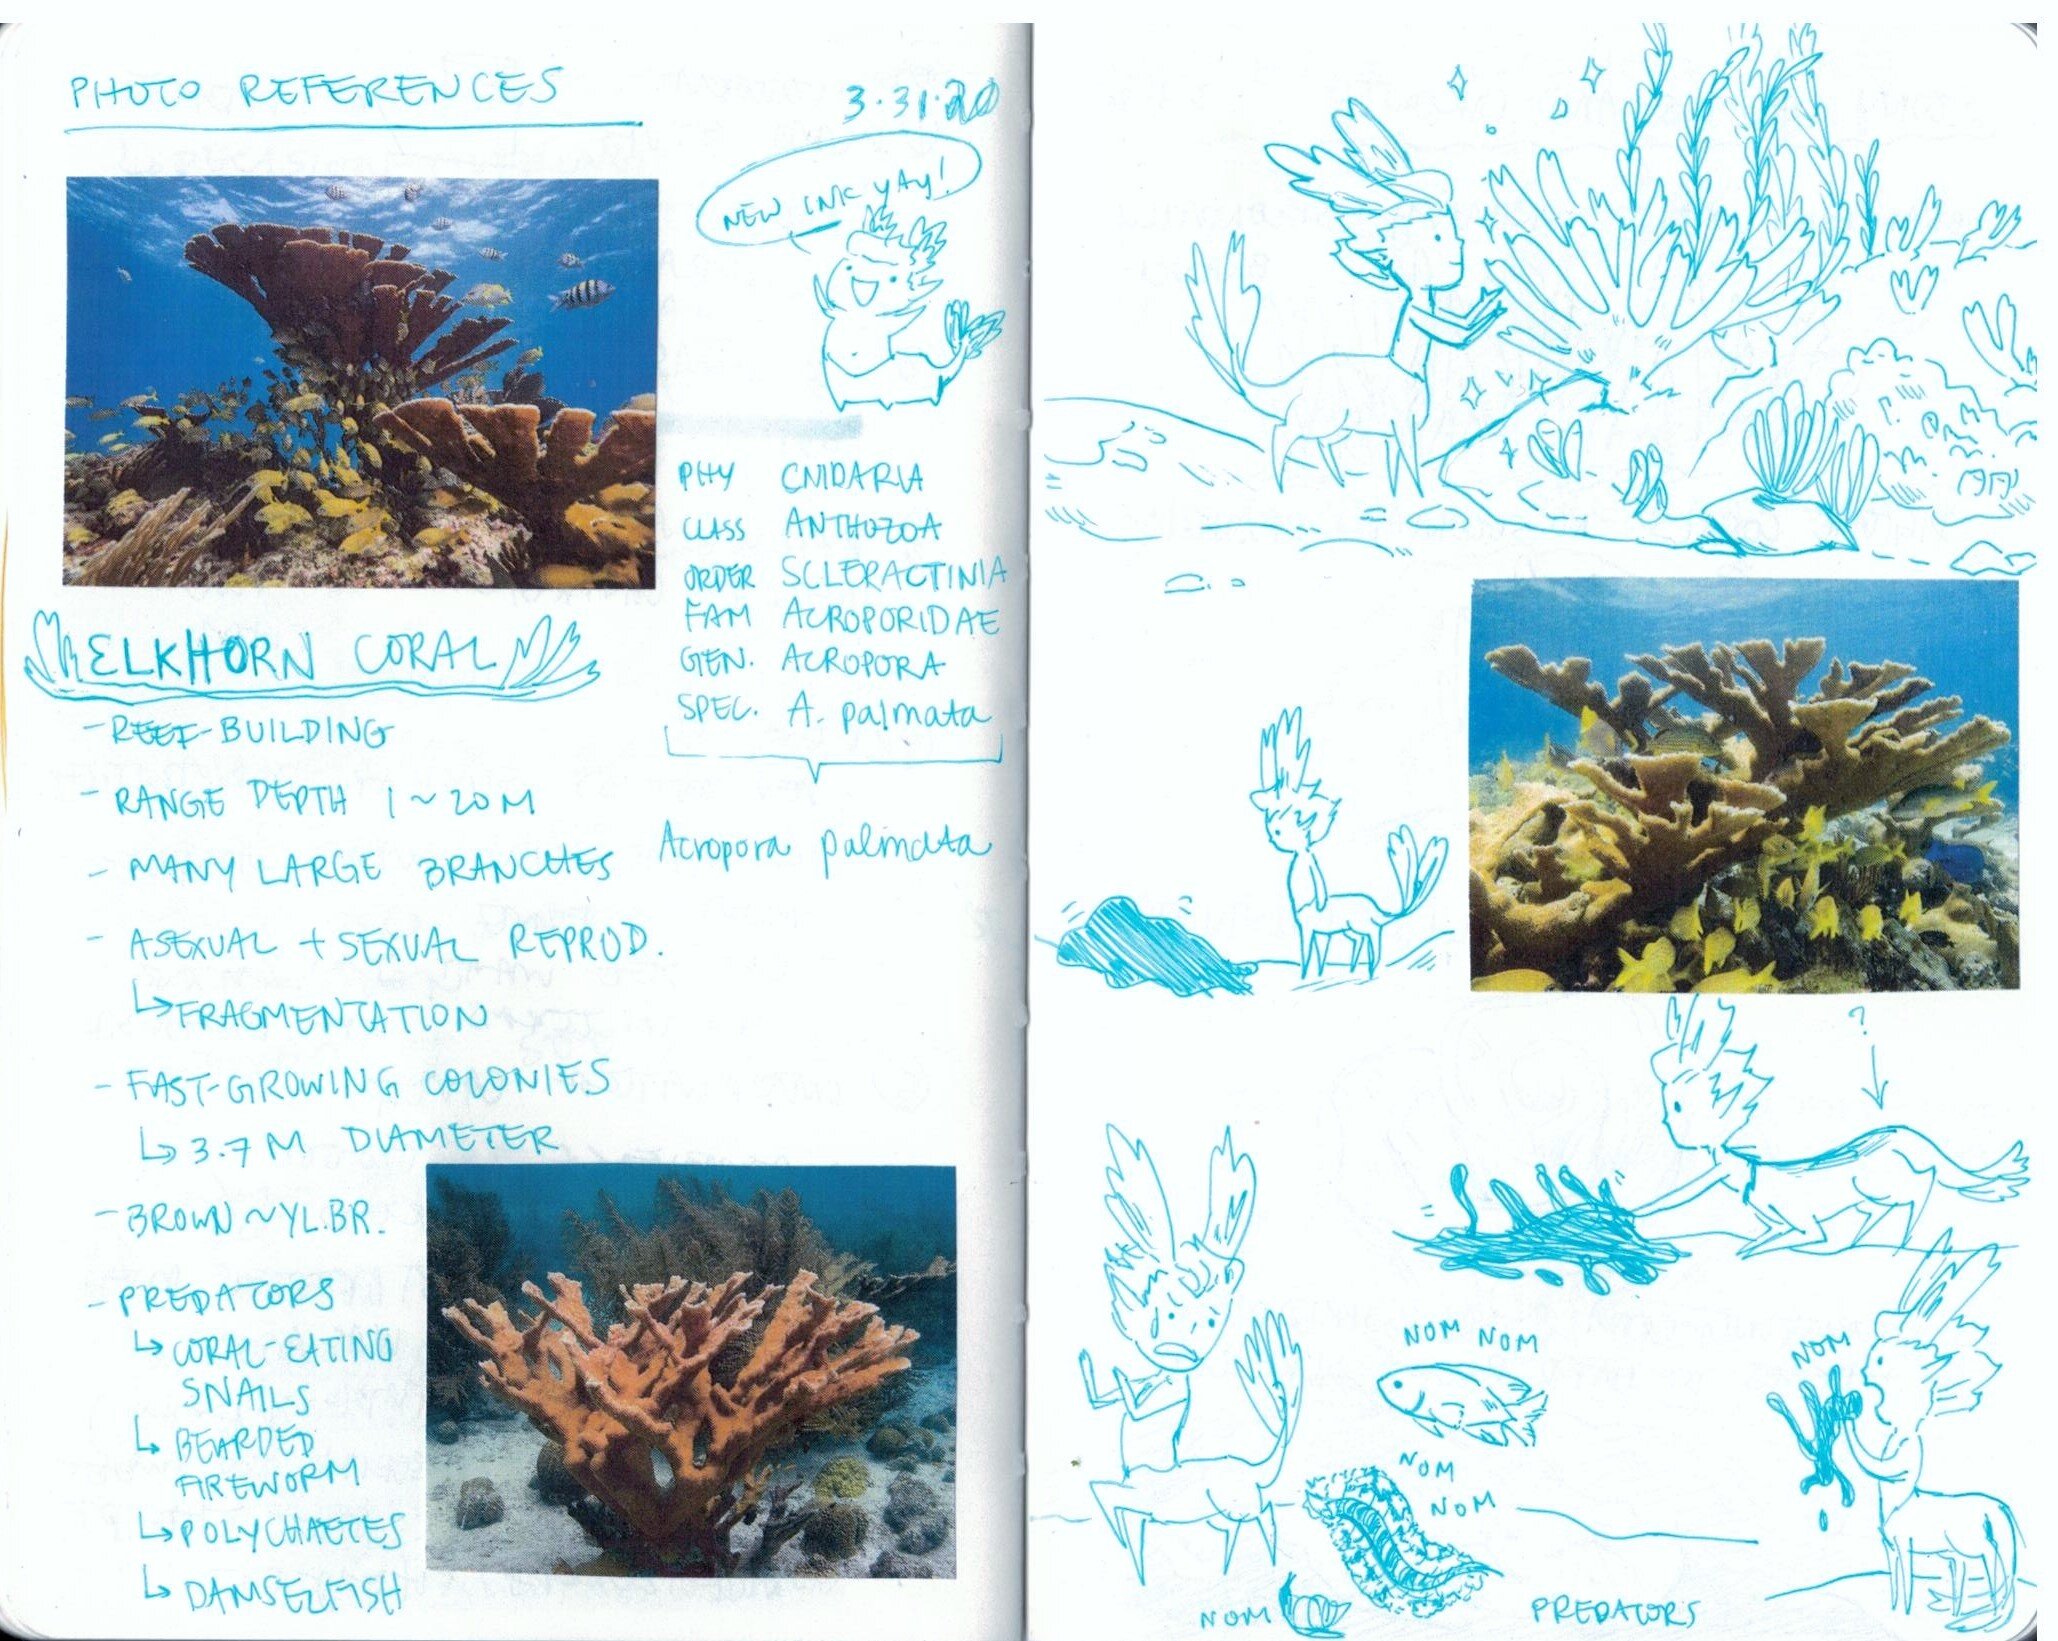  Excerpt from my design notebook where I researched elkhorn coral for the player character. 